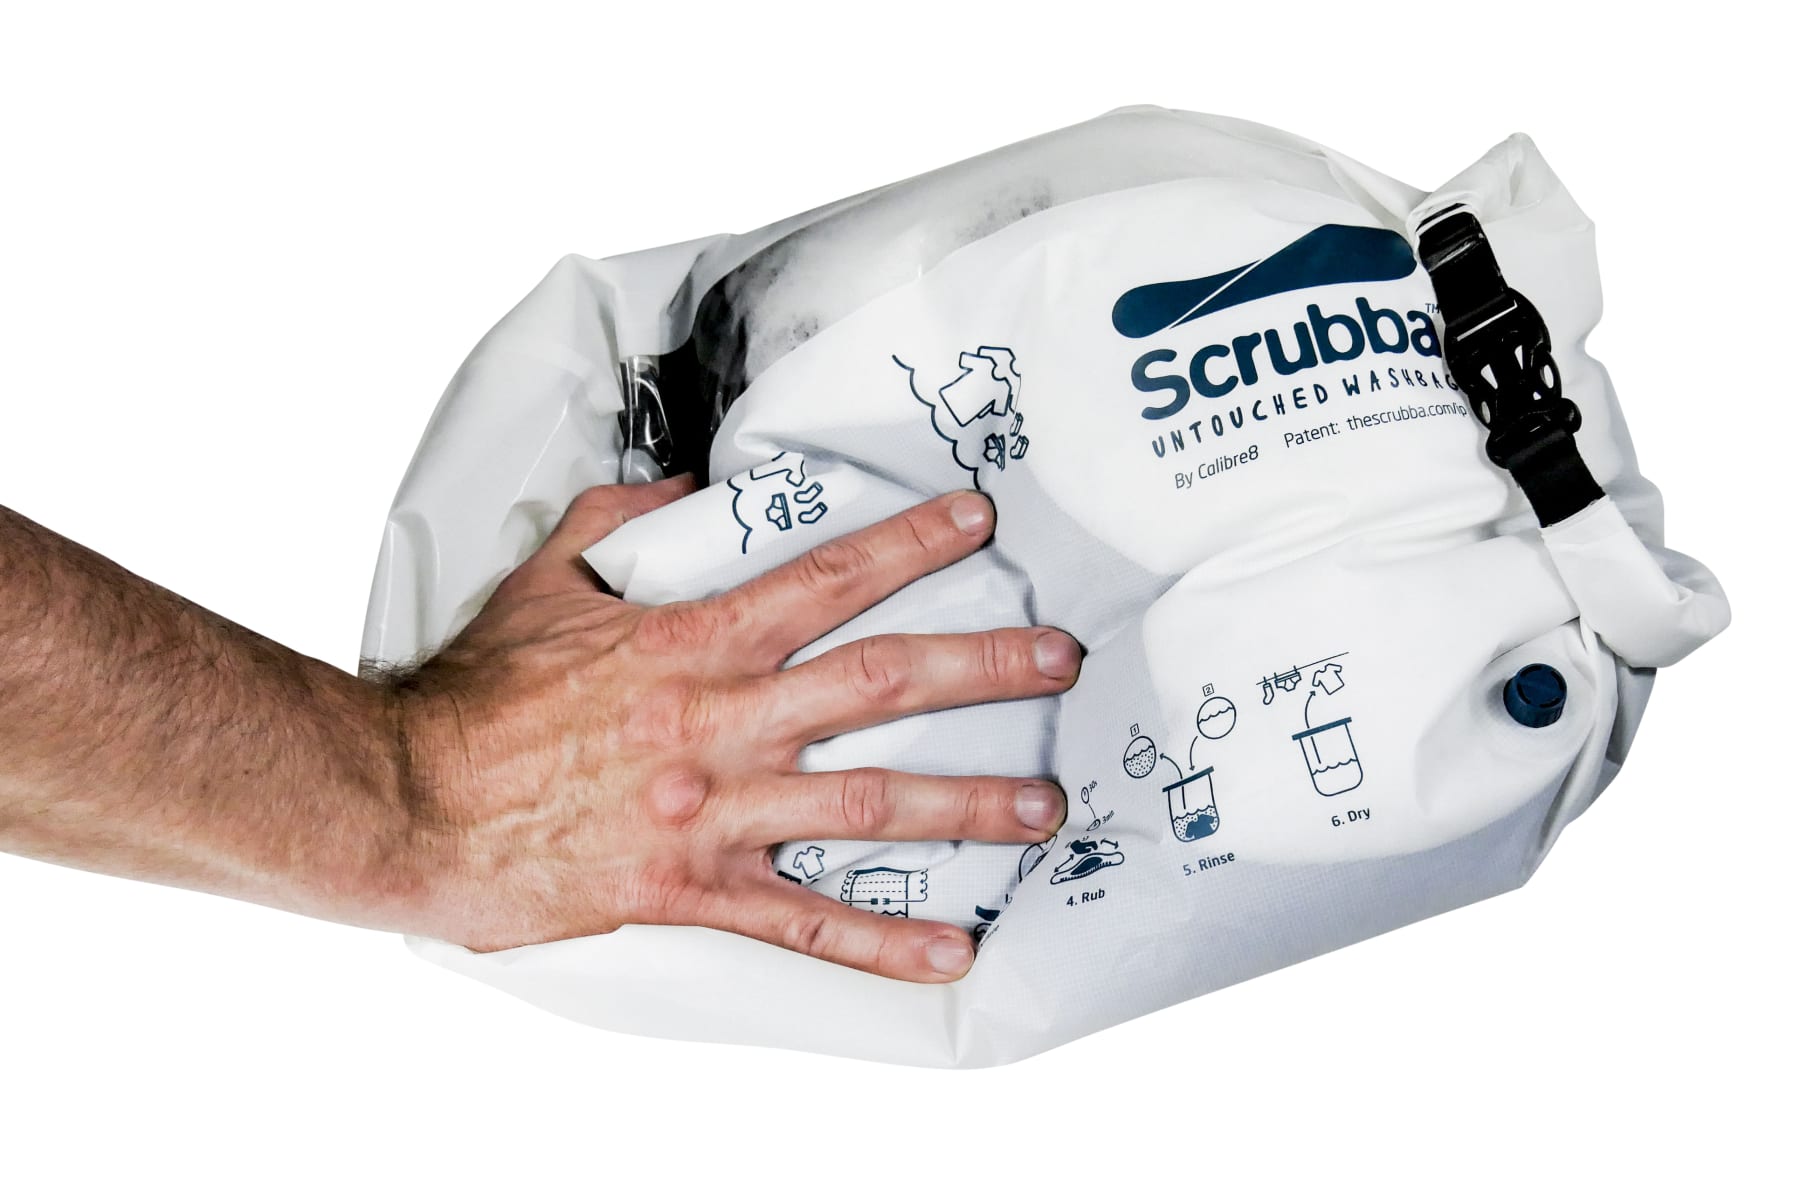 The Scrubba Family of Products - Enhancing Lives with Portable